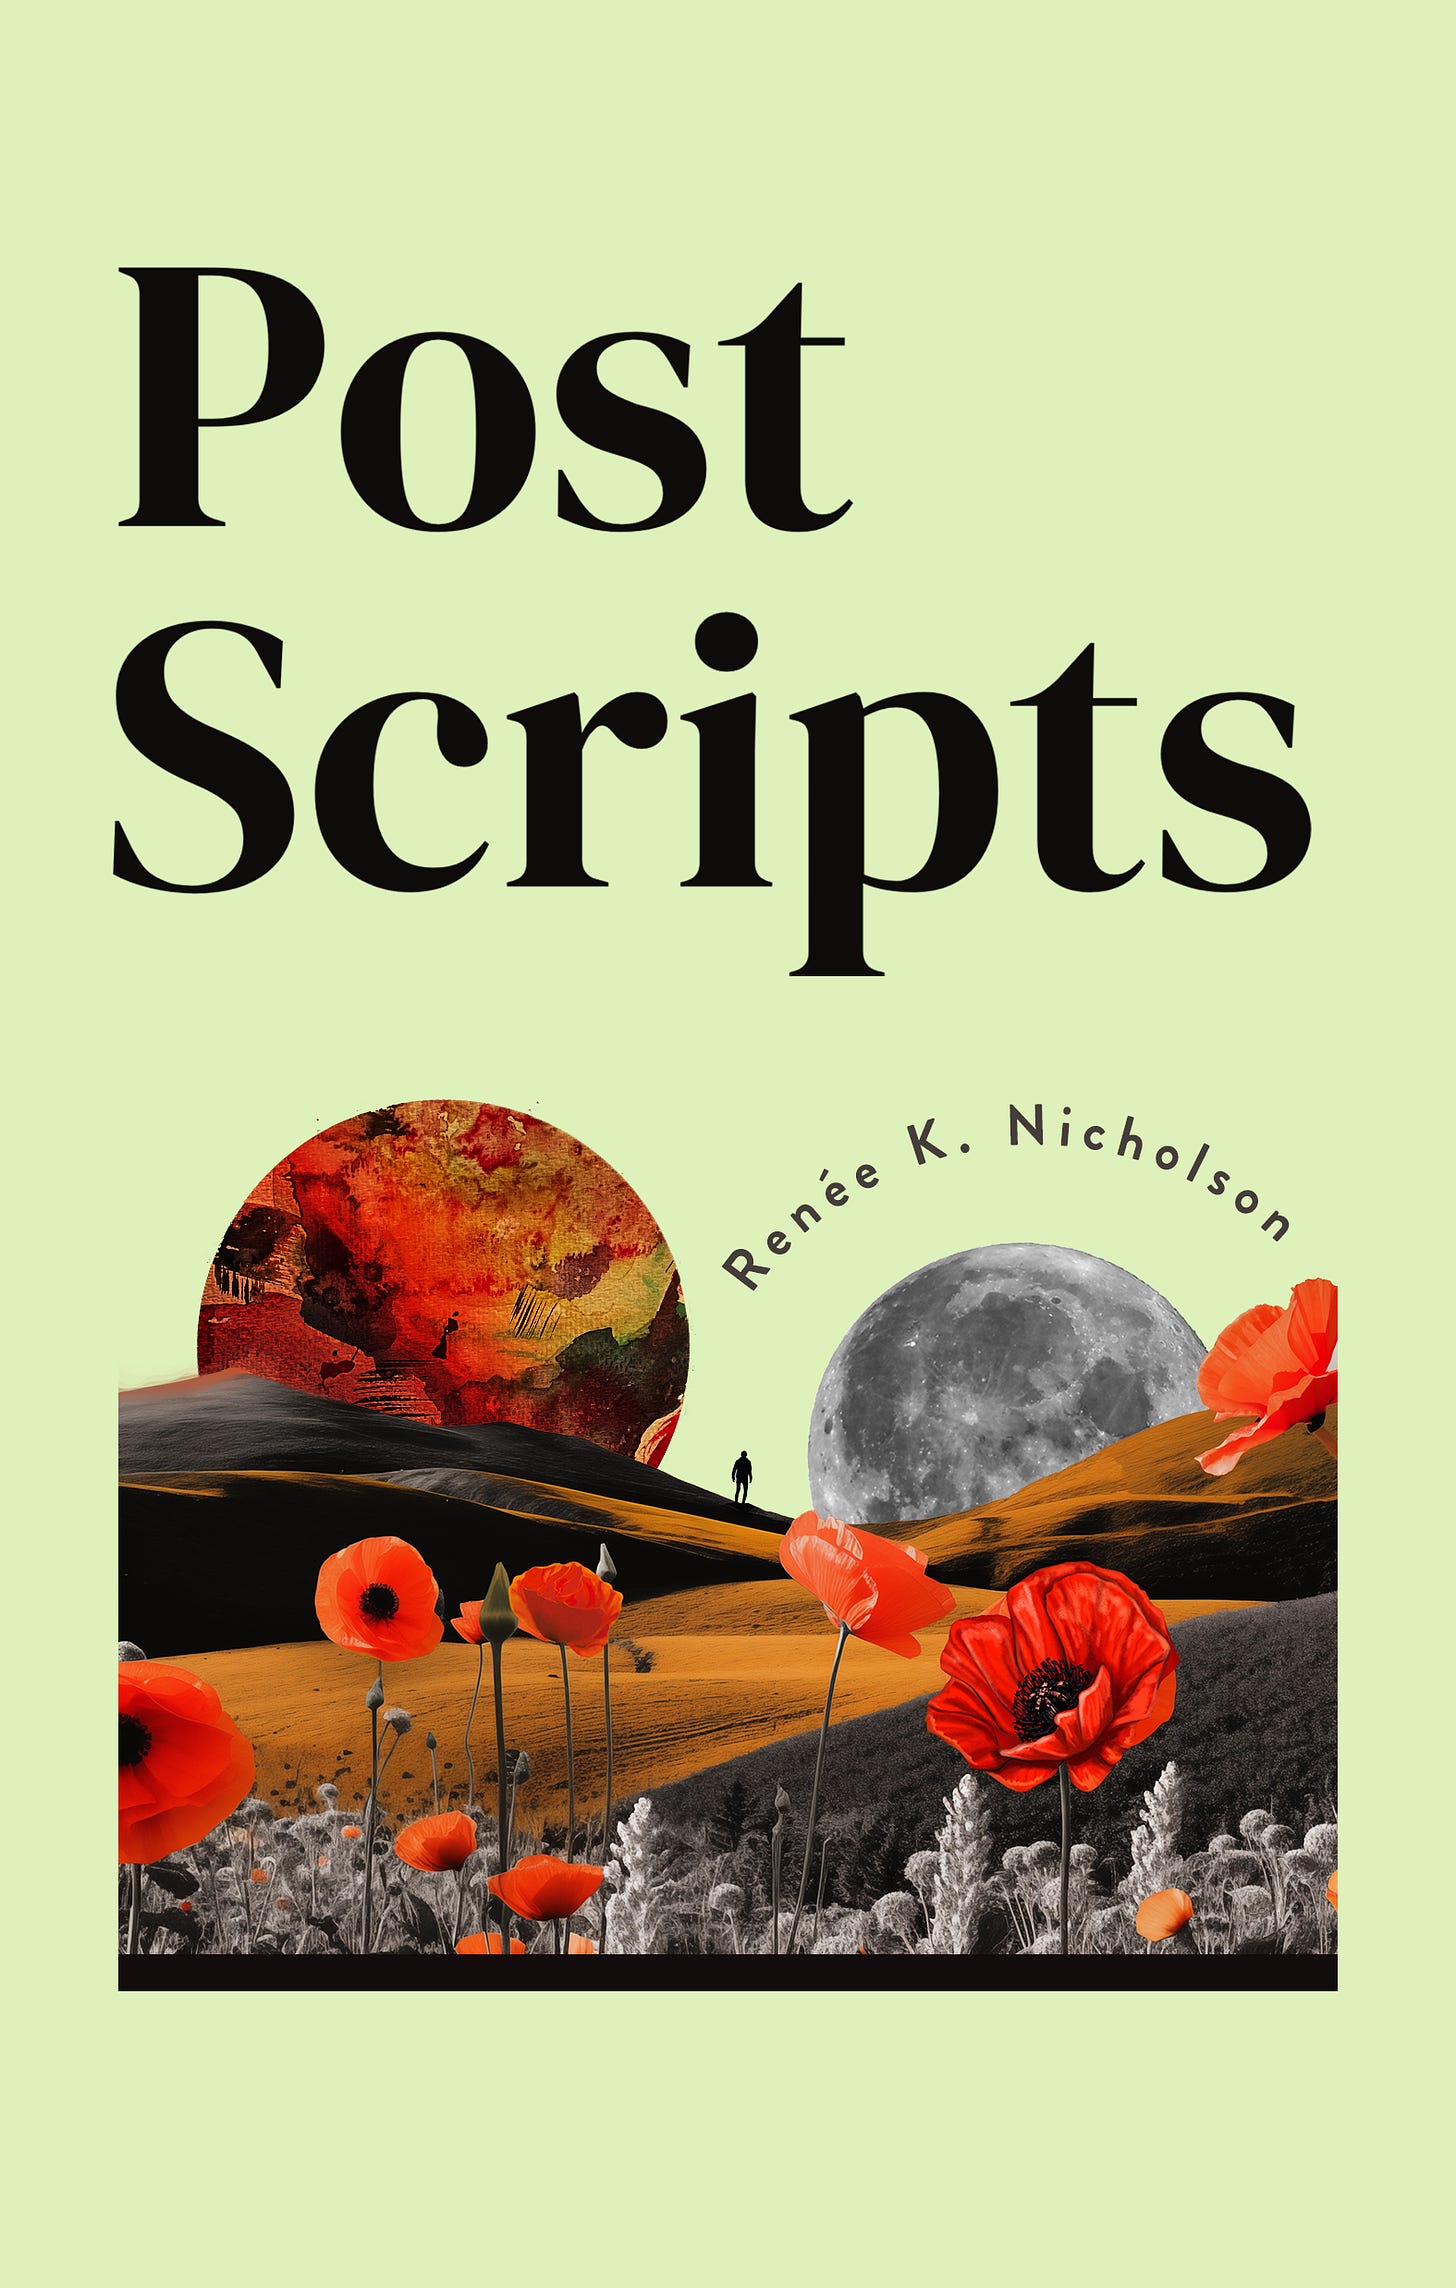 Book cover for *Postscripts*, which is light green background, with red- orange elements and some black and white.  highlight